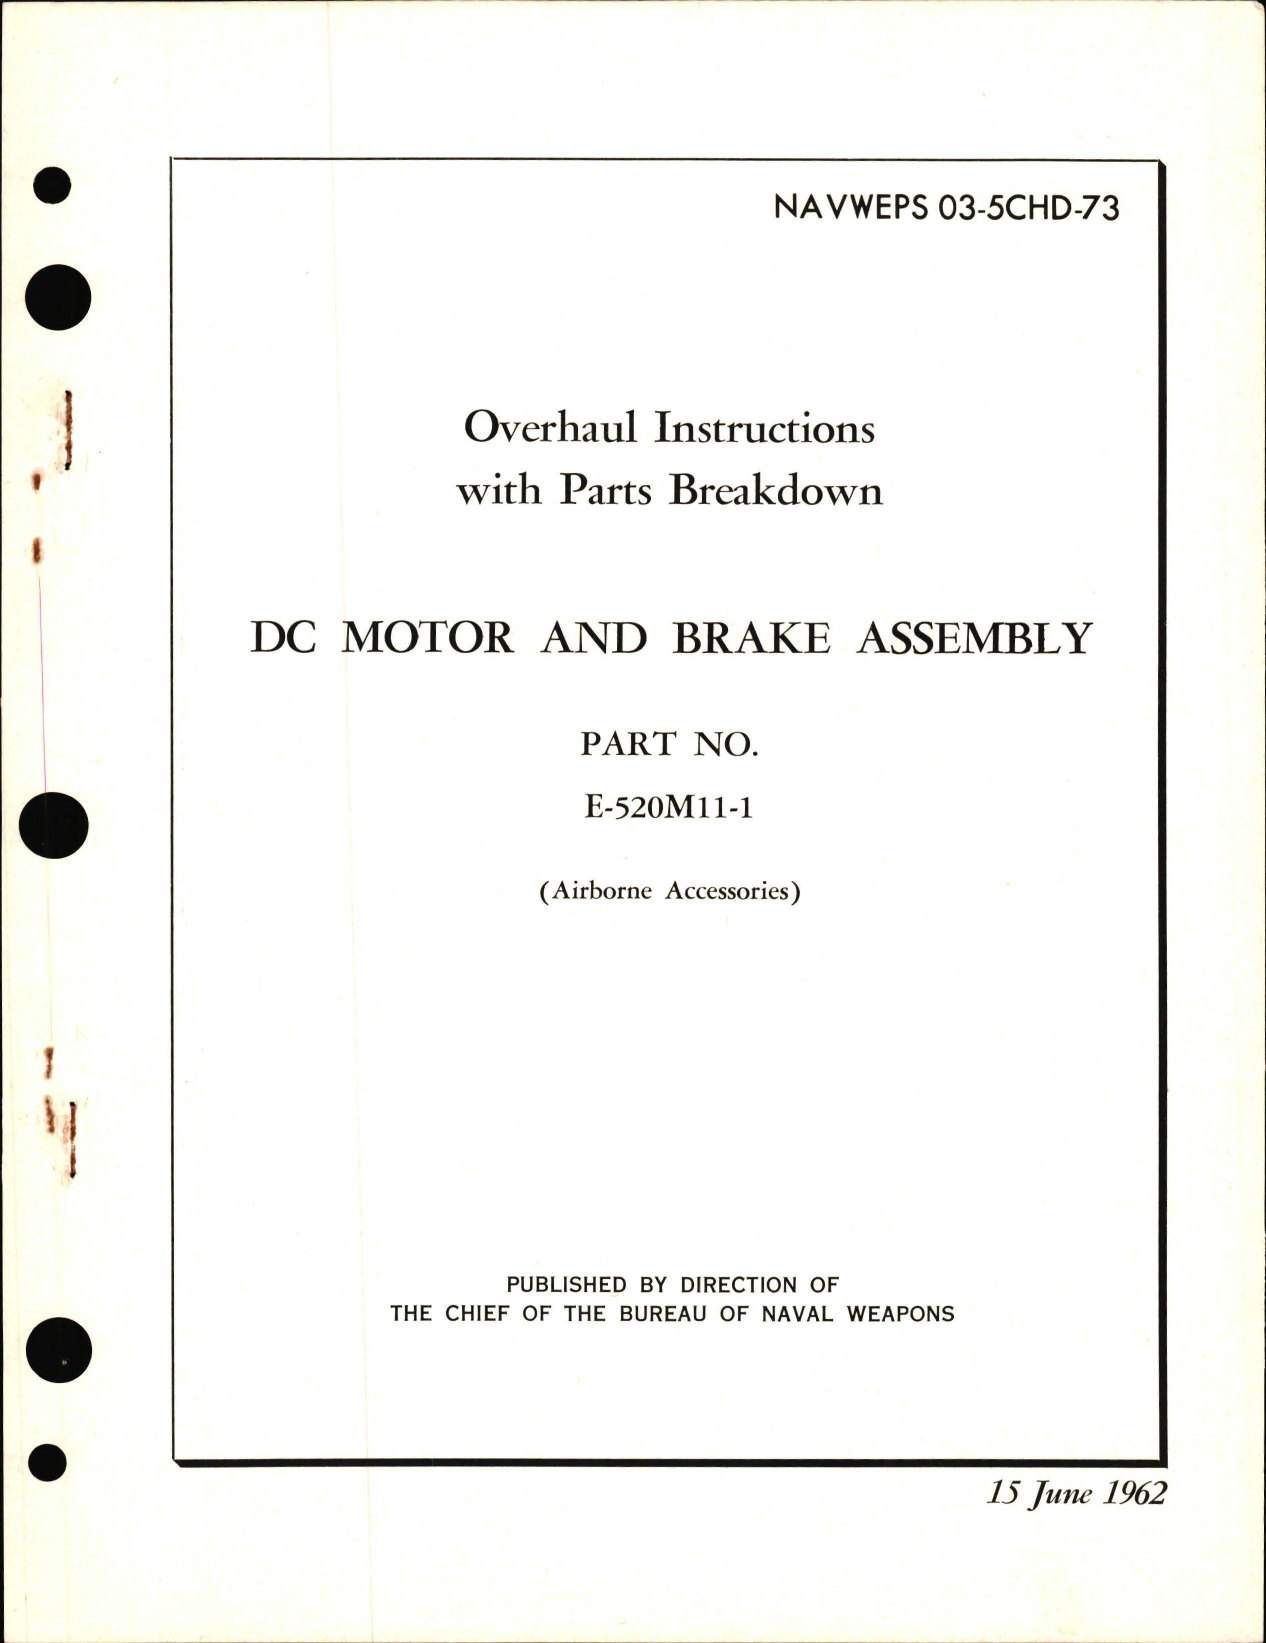 Sample page 1 from AirCorps Library document: Overhaul Instructions with Parts Breakdown for DC Motor and Brake Assembly E-520M11-1